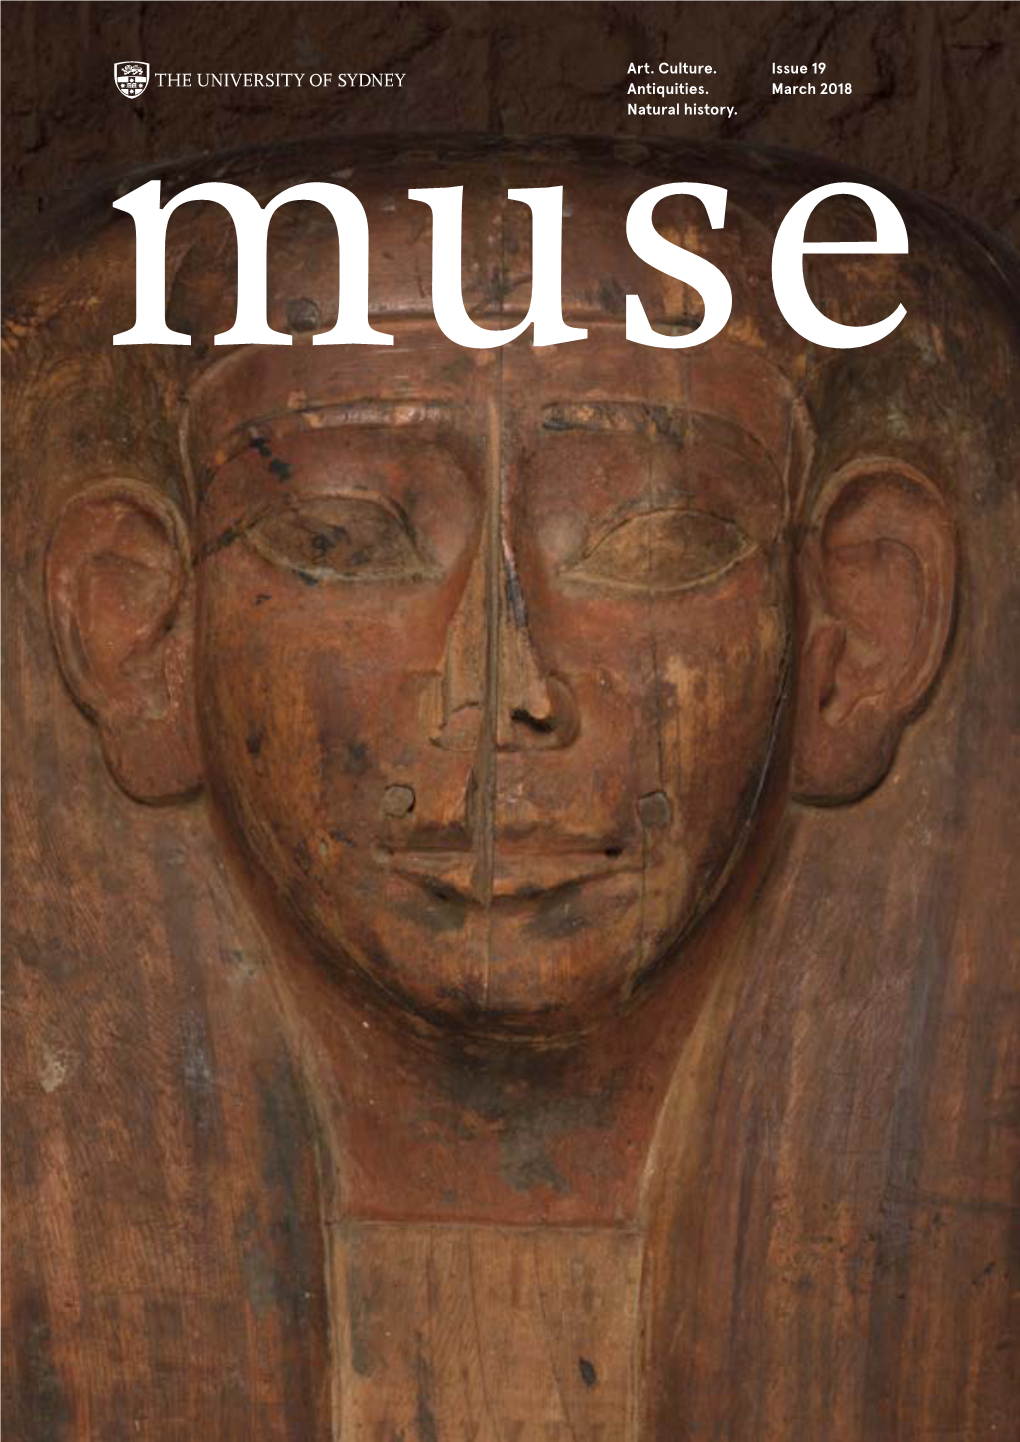 Issue 19 March 2018 Art. Culture. Antiquities. Natural History